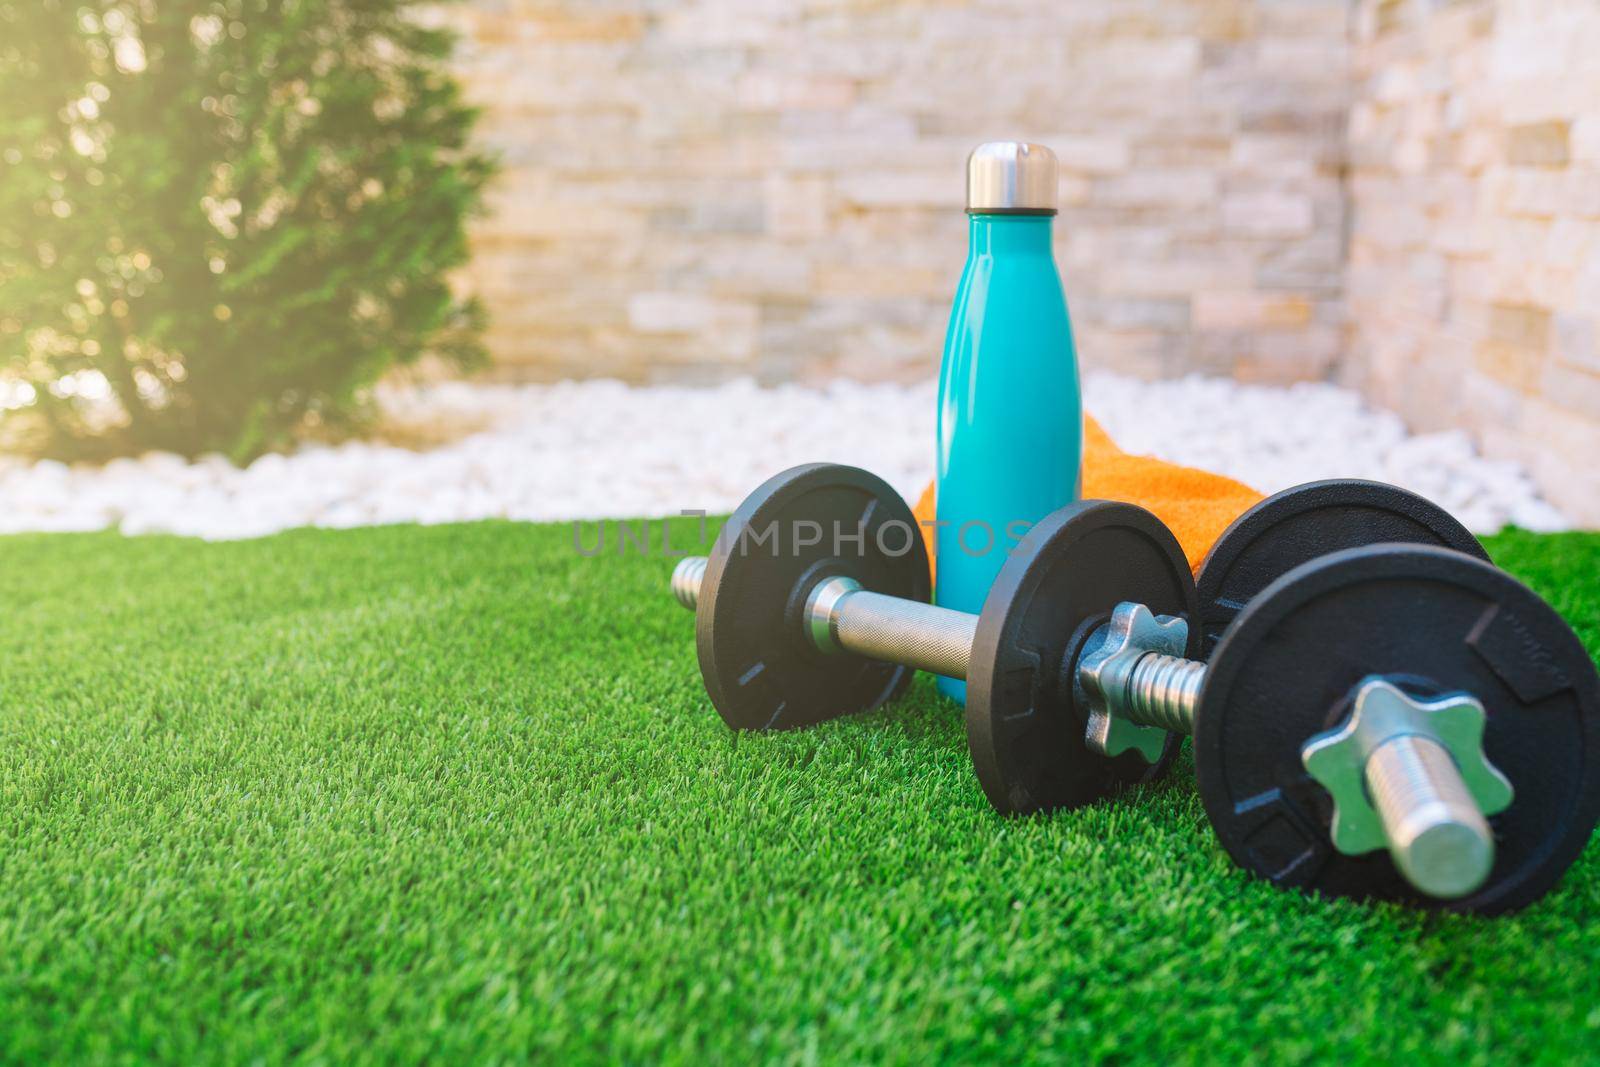 sports equipment on the green grass in the sunlit garden. orange towel, water bottle, weights. stone wall background. by CatPhotography